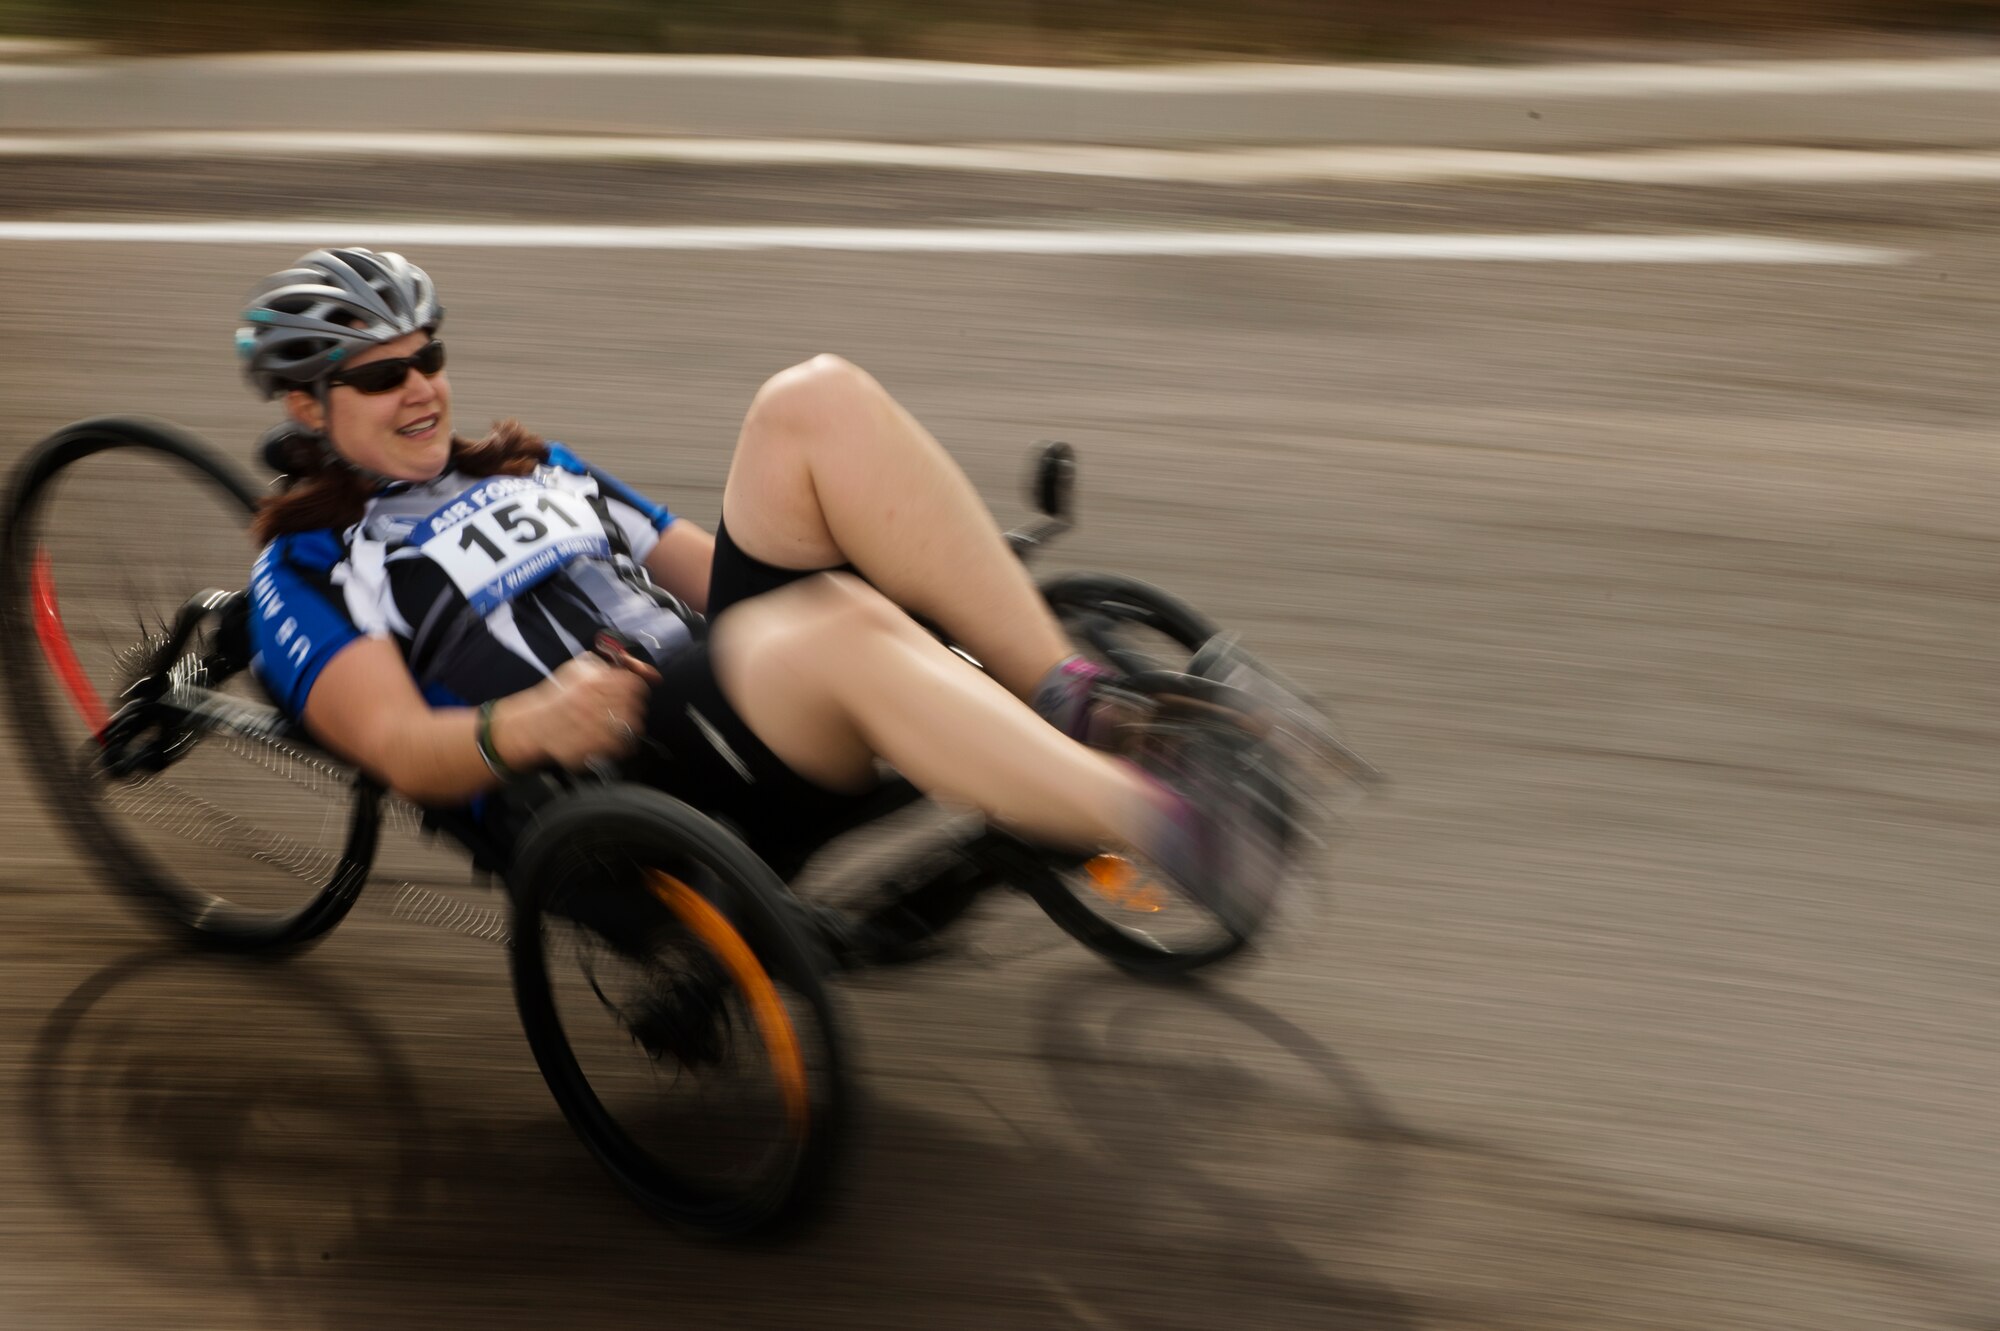 Jen Peters Kyseth sprints around a corner on a recumbent bike April 9, 2014, during the cycling portion of the Air Force Trials at Nellis Air Force Base, Nev.  Kyseth competed with other wounded warriors for a place on a team for the Warrior Games or Invictus Games.  (U.S. Air Force photo/Senior Airman Jette Carr)